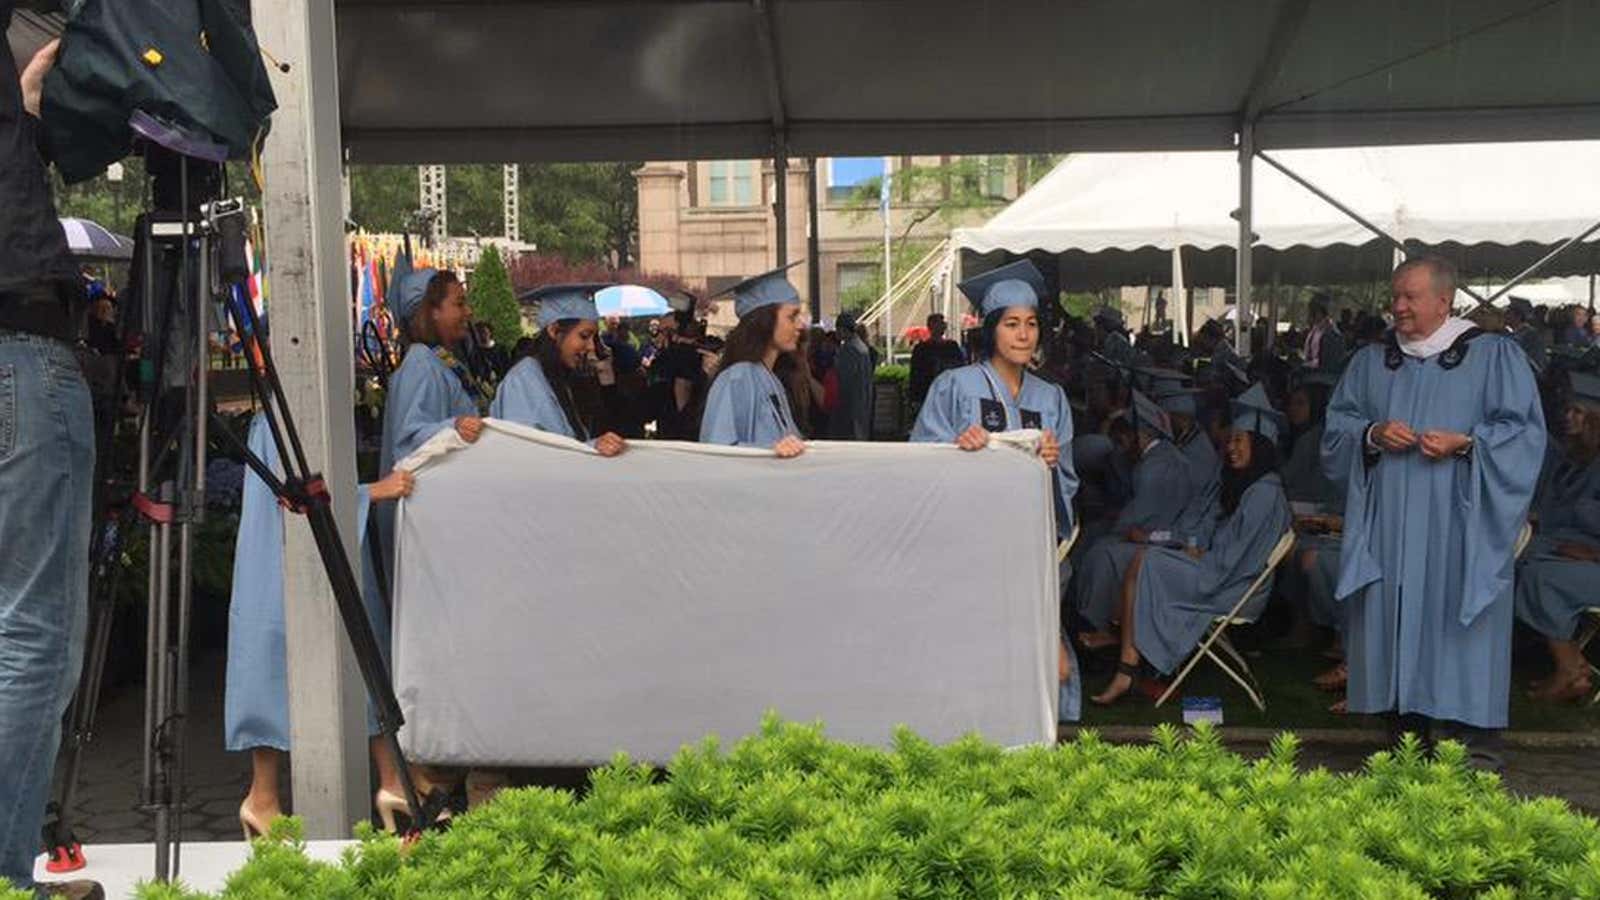 Columbia University student Emma Sulkowicz carried her mattress across her graduation stage